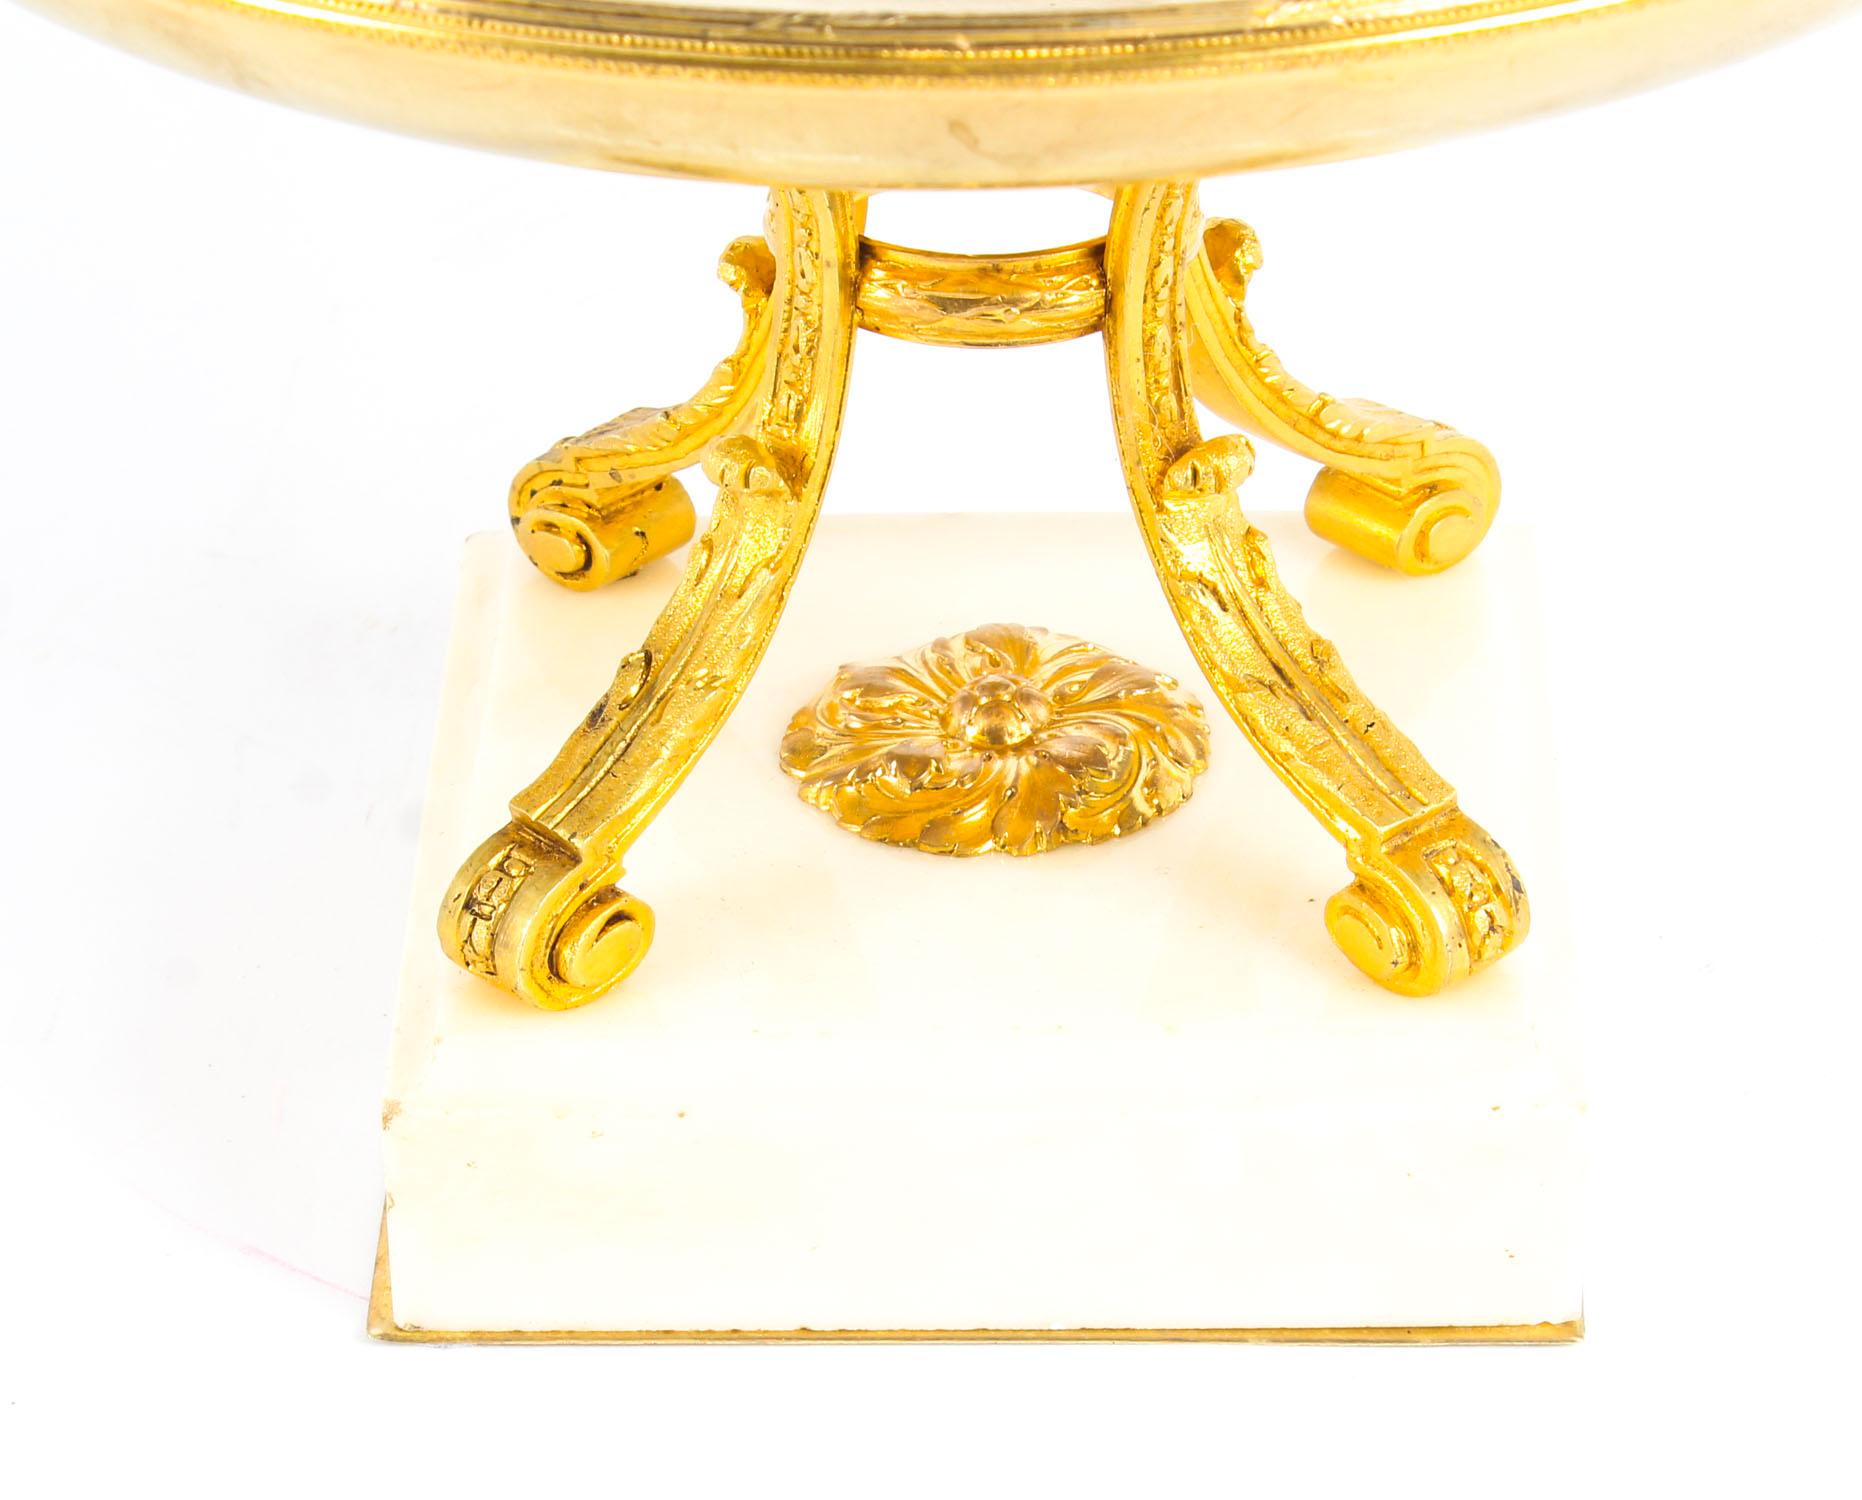 Antique French Ormolu Tazza with Limoges Enamel Plaque, 19th Century For Sale 3